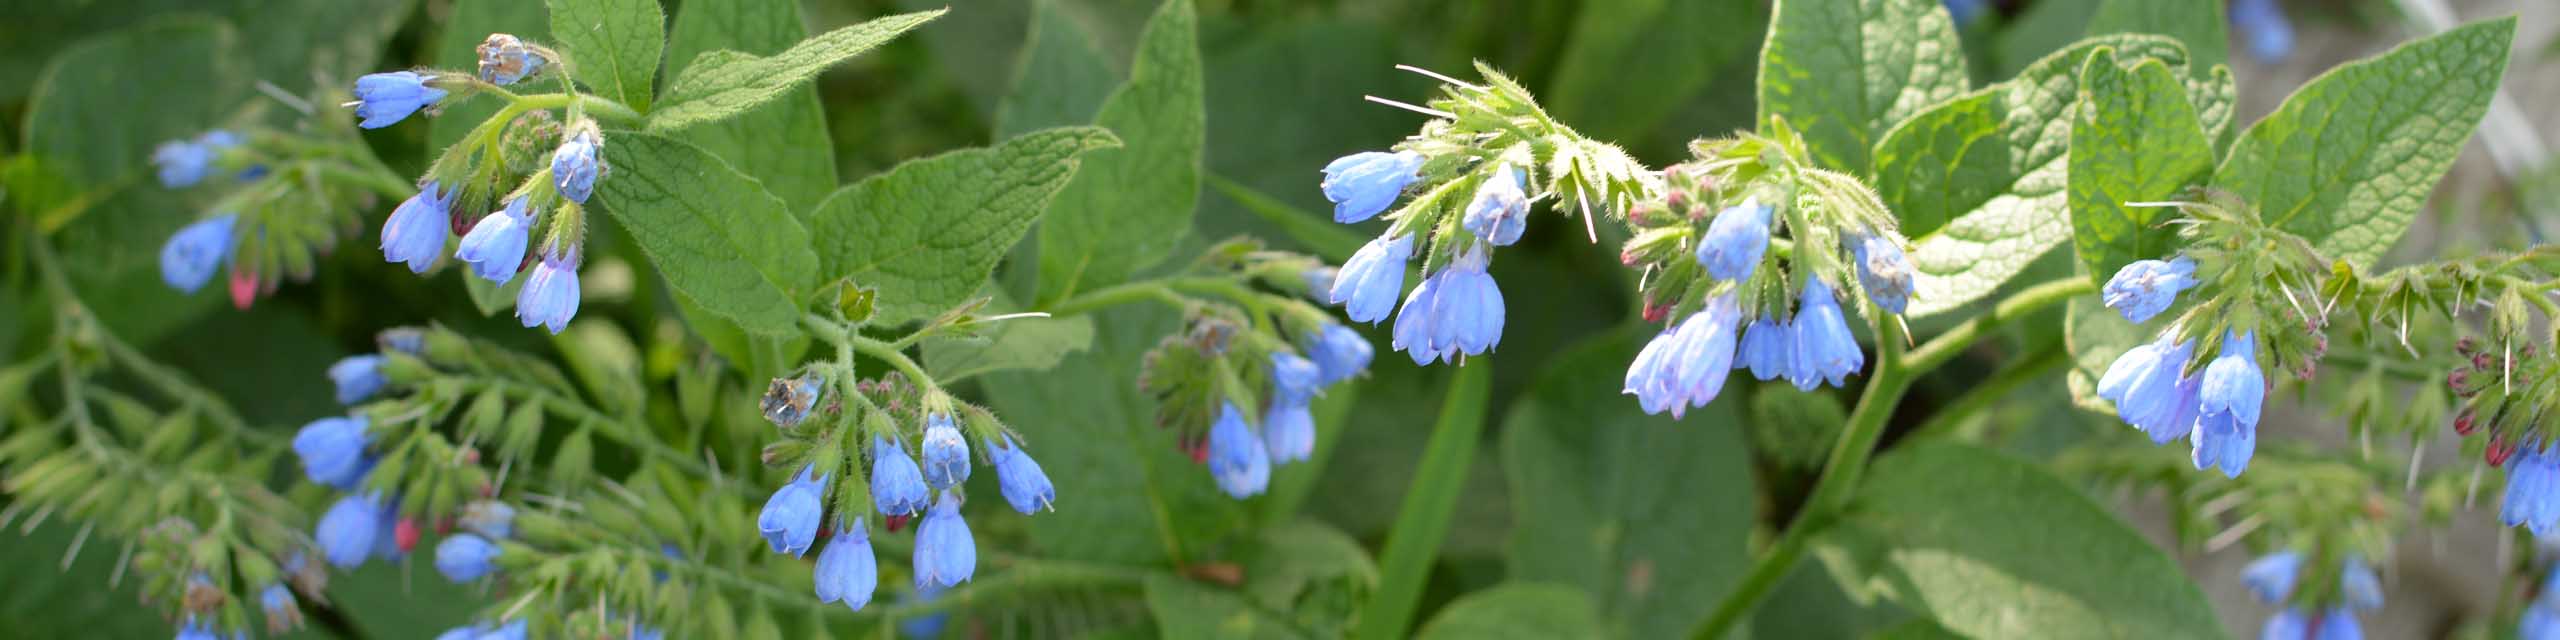 A mature comfrey plant with blue flowers.